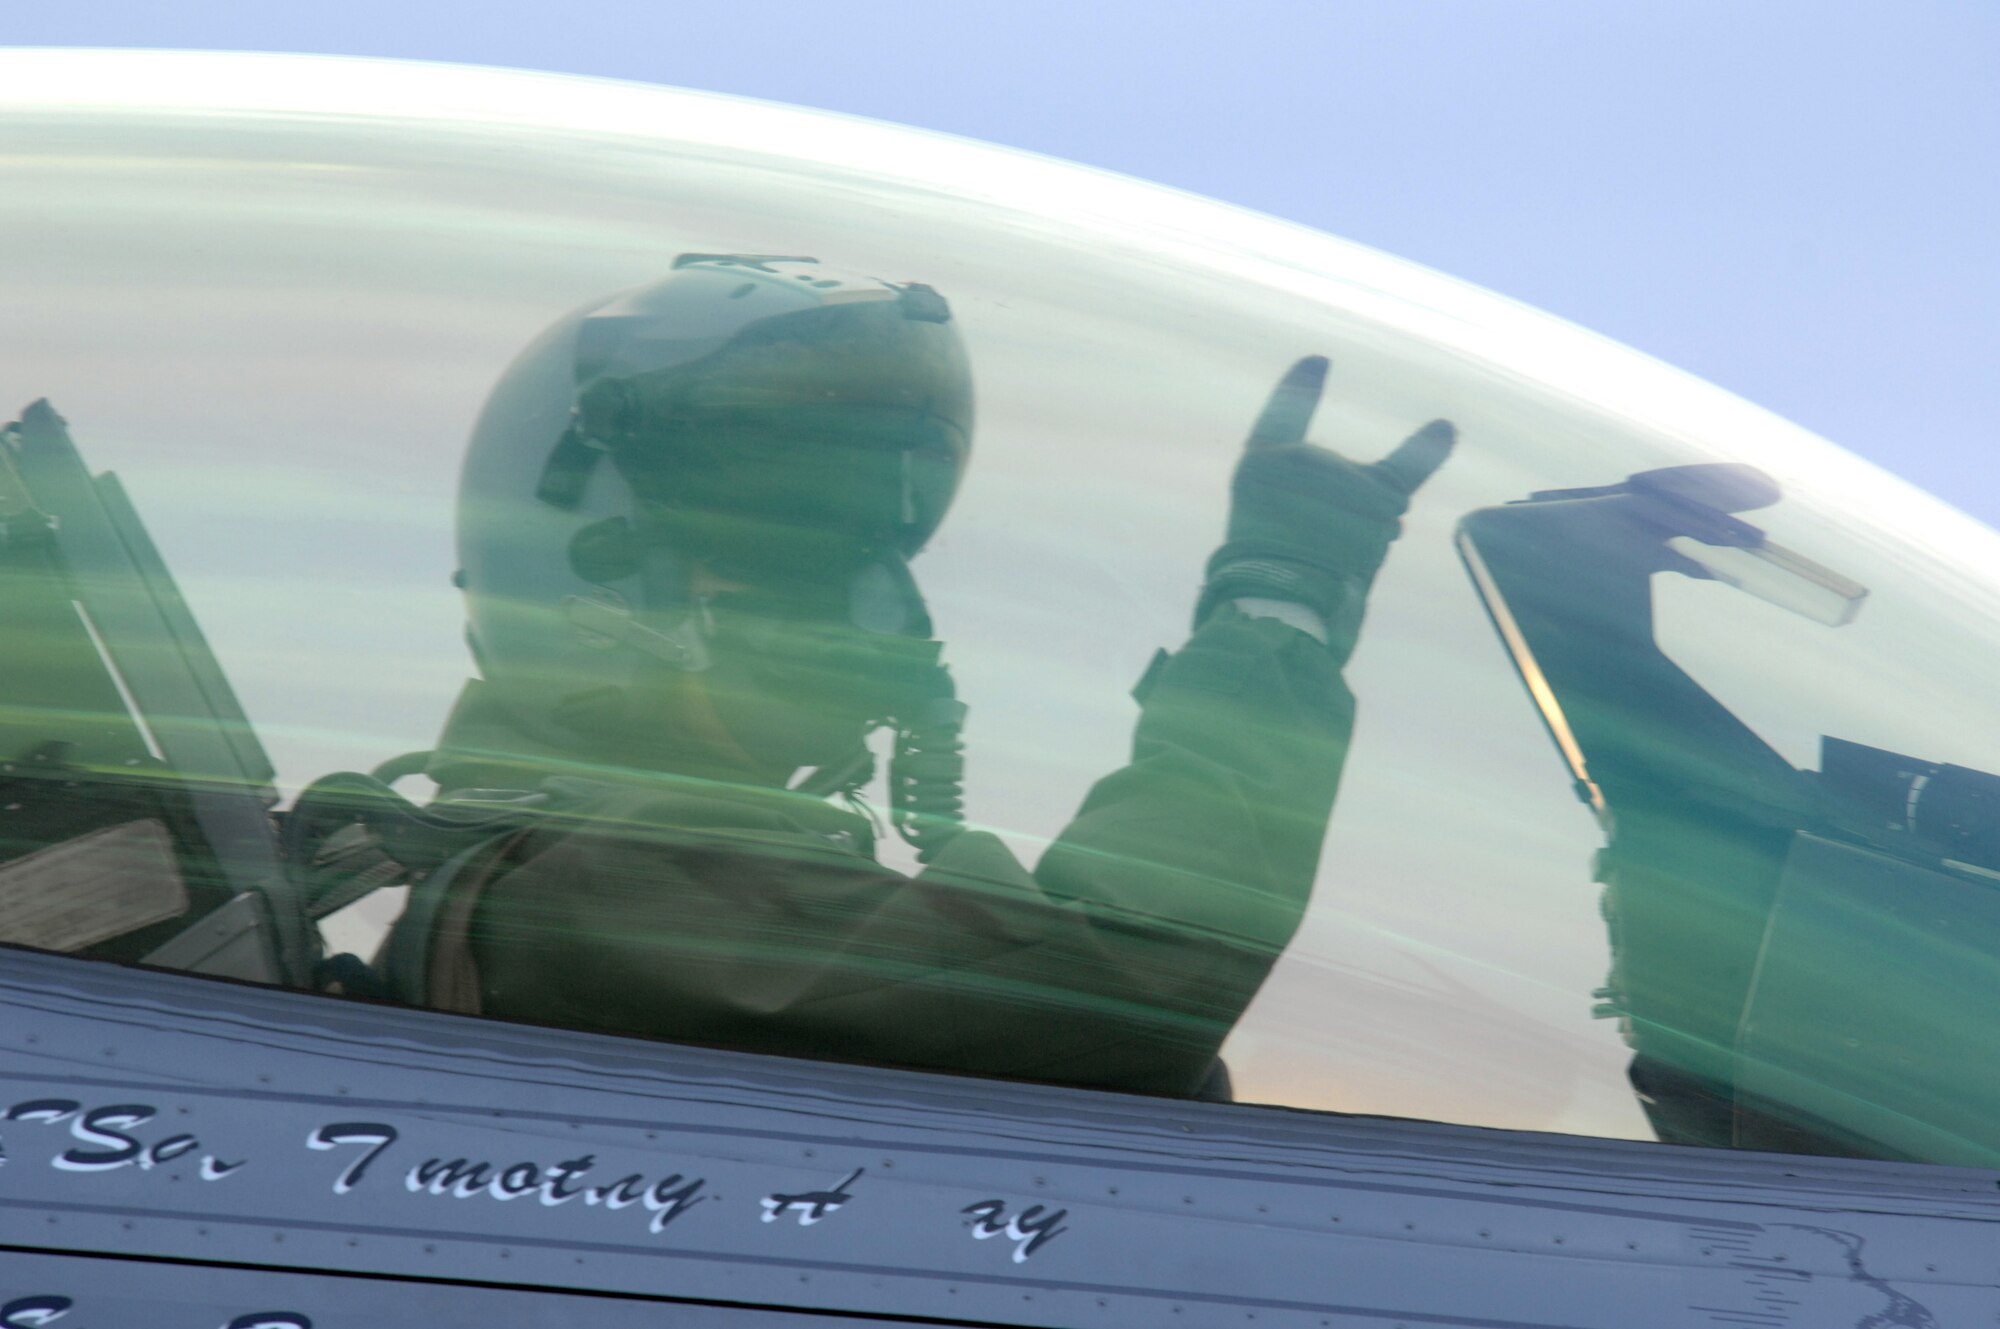 EIELSON AIR FORCE BASE, Alaska -- An F-16 Fighting Falcon pilot from the 18th Fighter Squadron signals from his aircraft prior to taking off for a training mission here on Feb.8. The 18th Fighter Squadron conducts air operations for combat-ready F-16 aircraft and provides close air support, forward air control (airborne), battlefield air interdiction, and offensive counter air.
(U.S. Air Force Photo by Staff Sgt Joshua Strang)